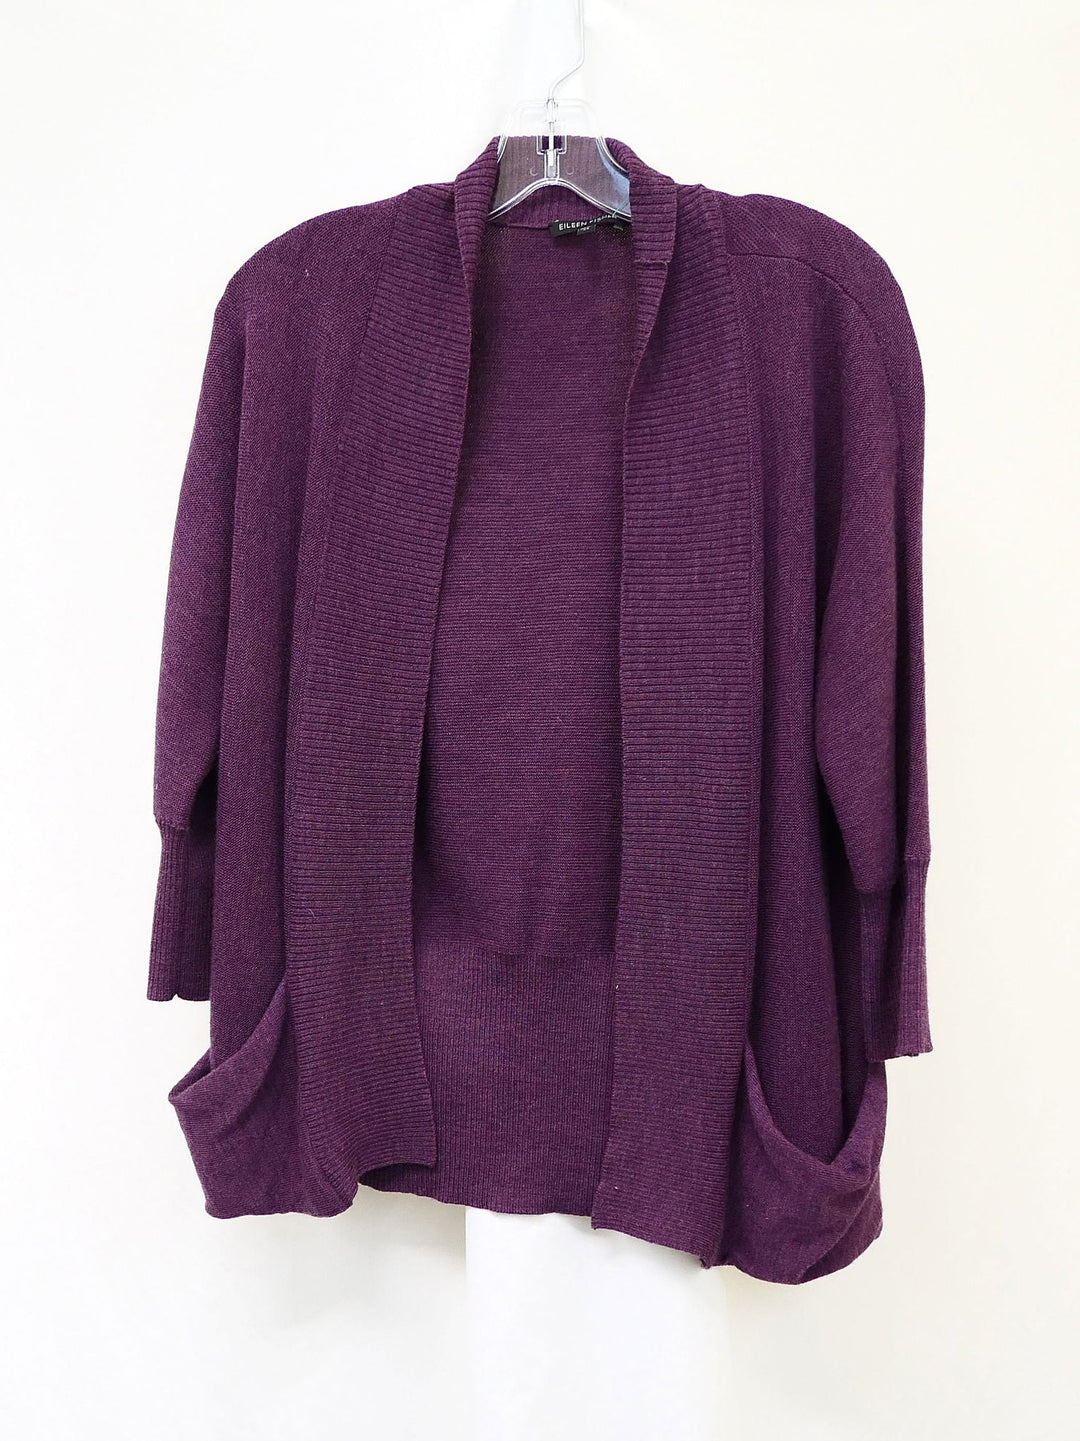 Eileen Fisher Cardigan - Size XS - The Kennedy Collective Thrift - 